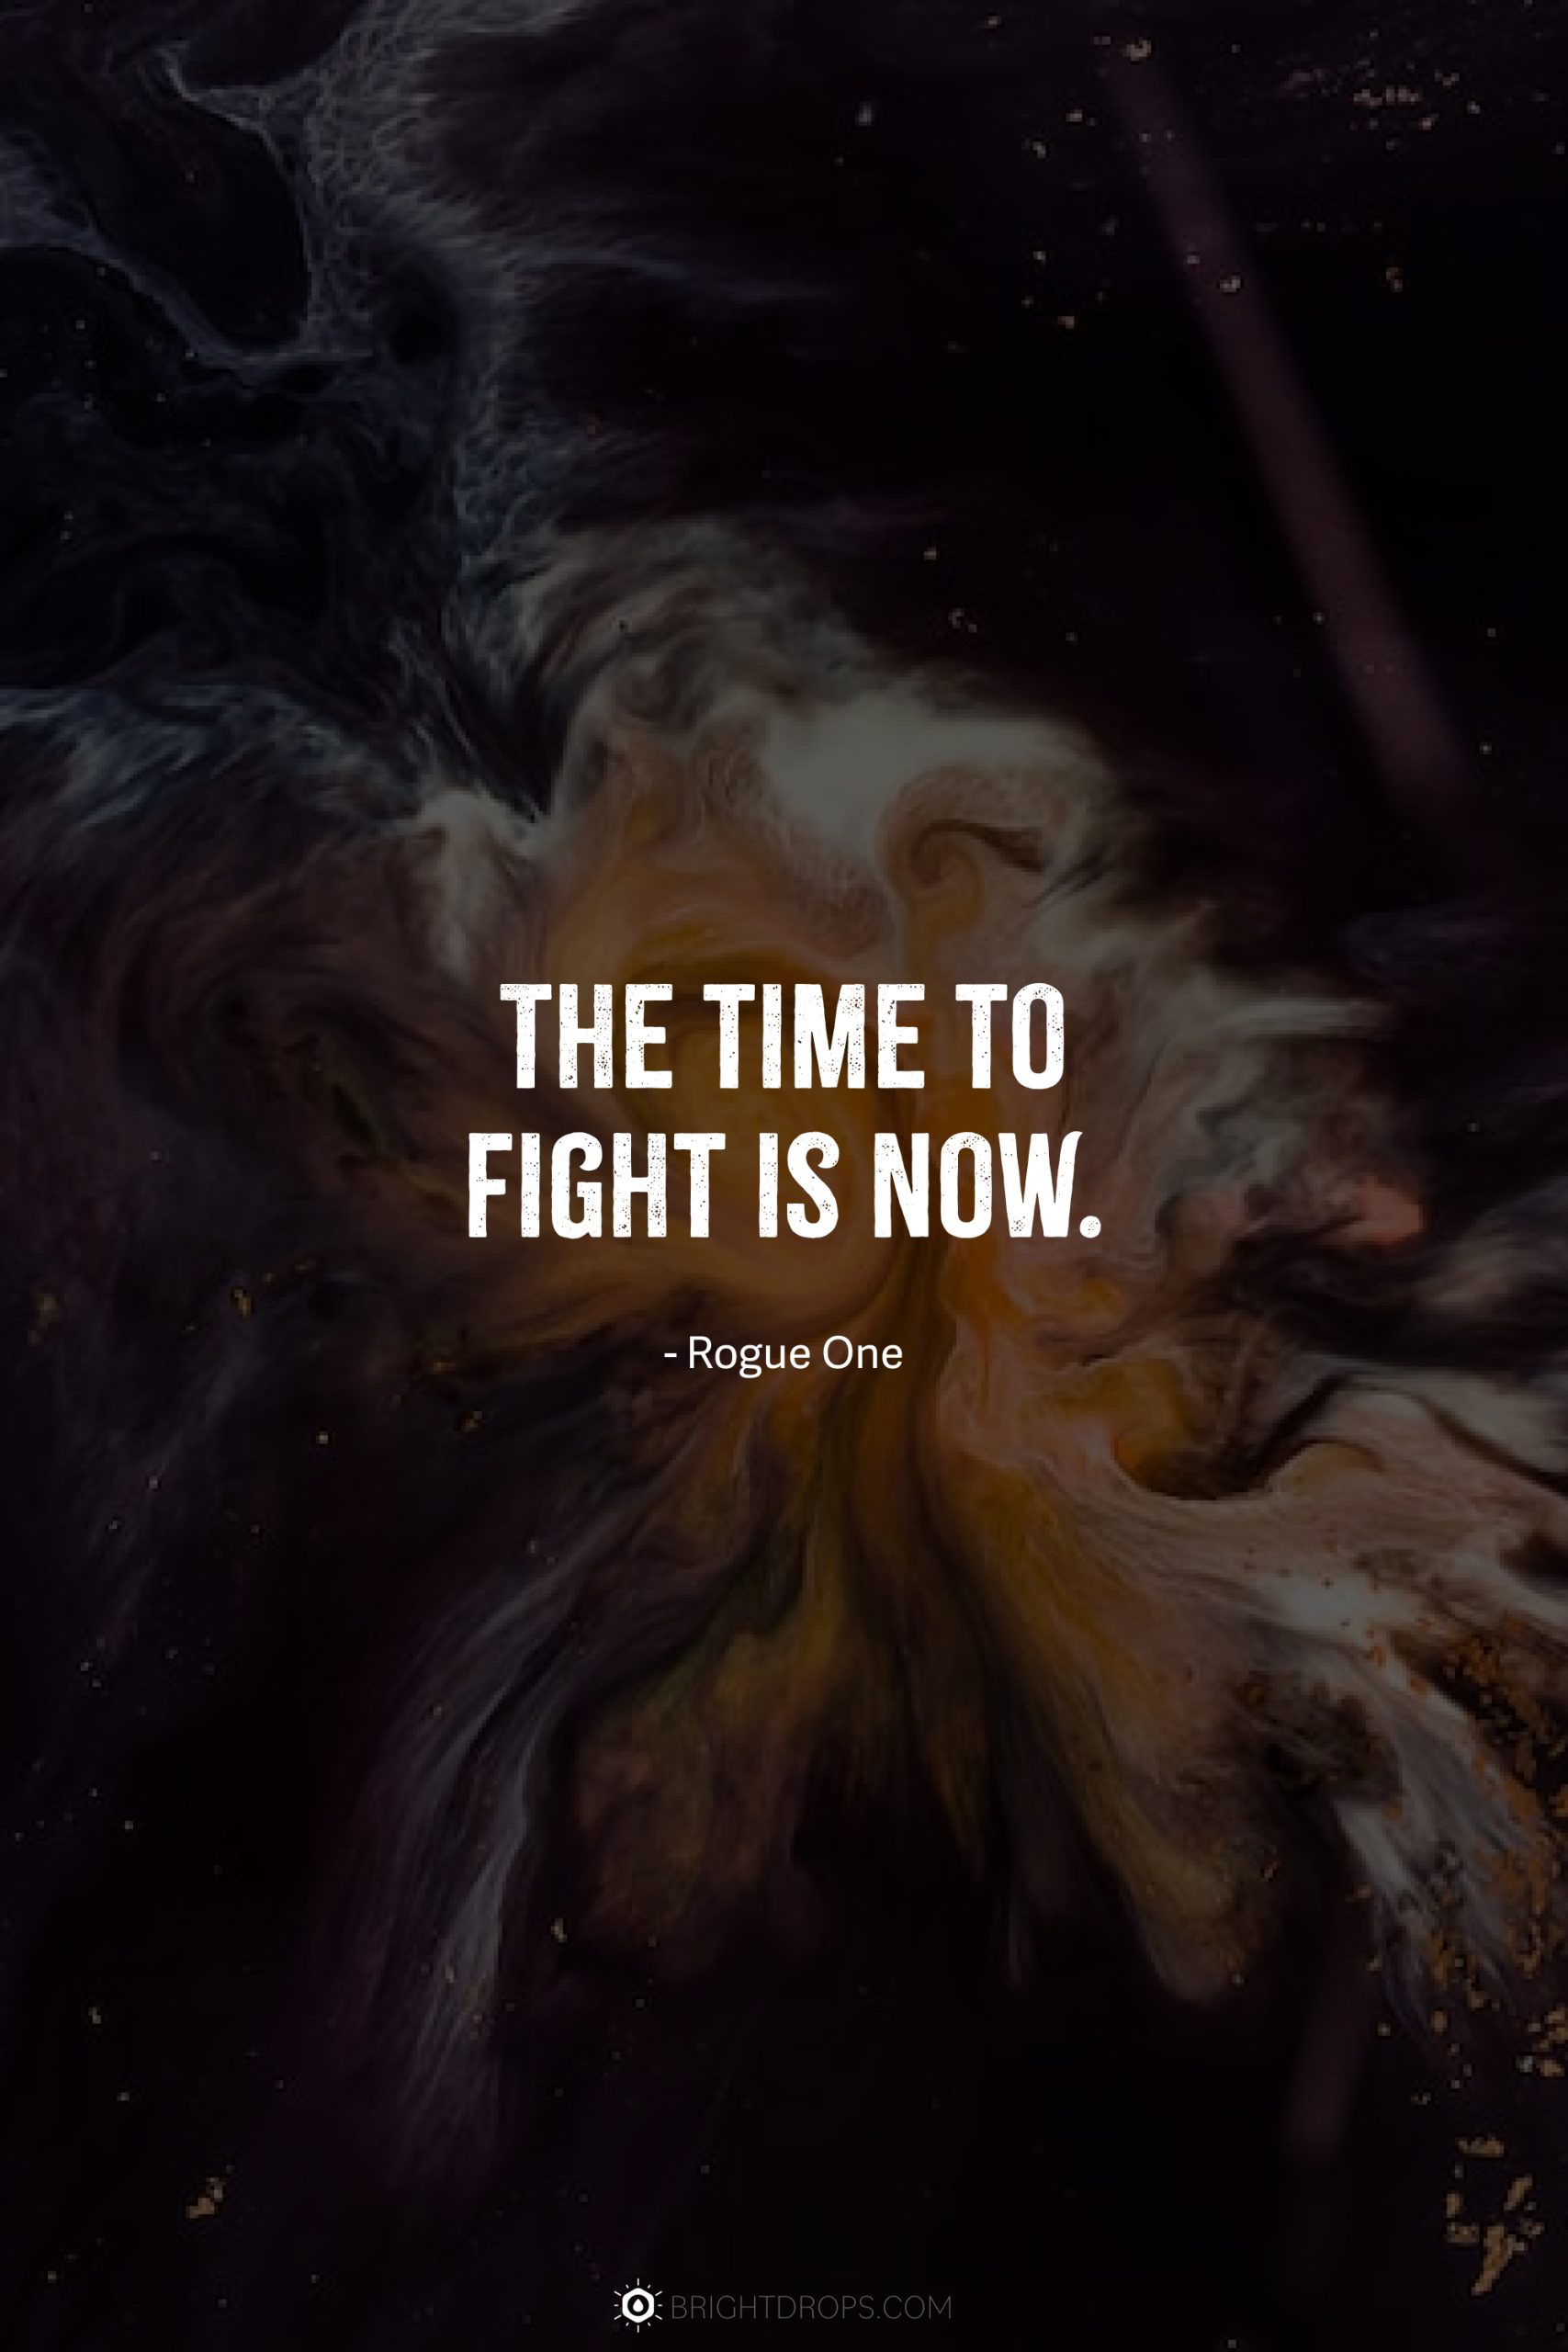 The time to fight is now.